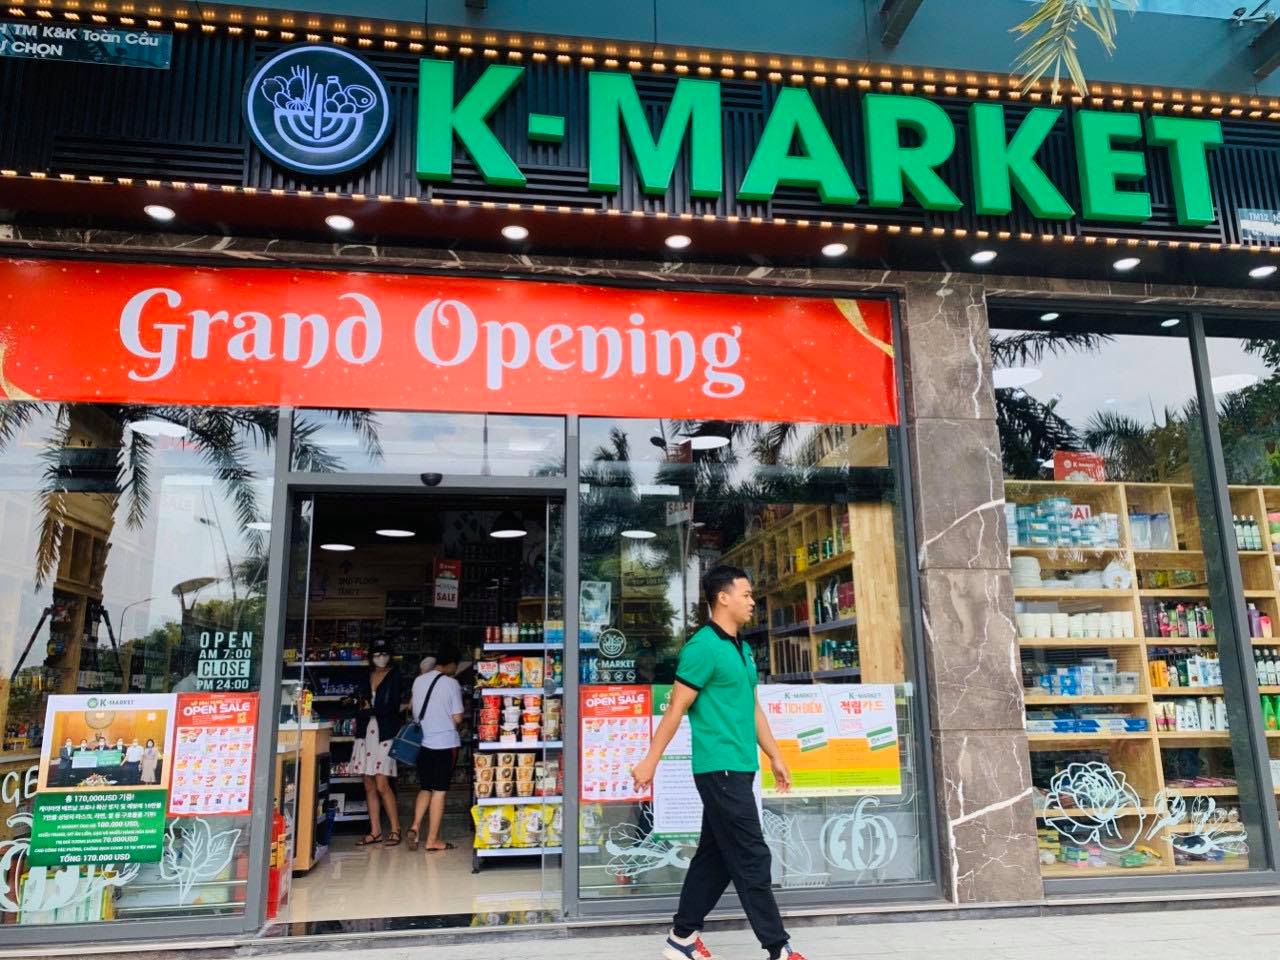 Although moderately expensive, K Market has a comprehensive range of Korean goods